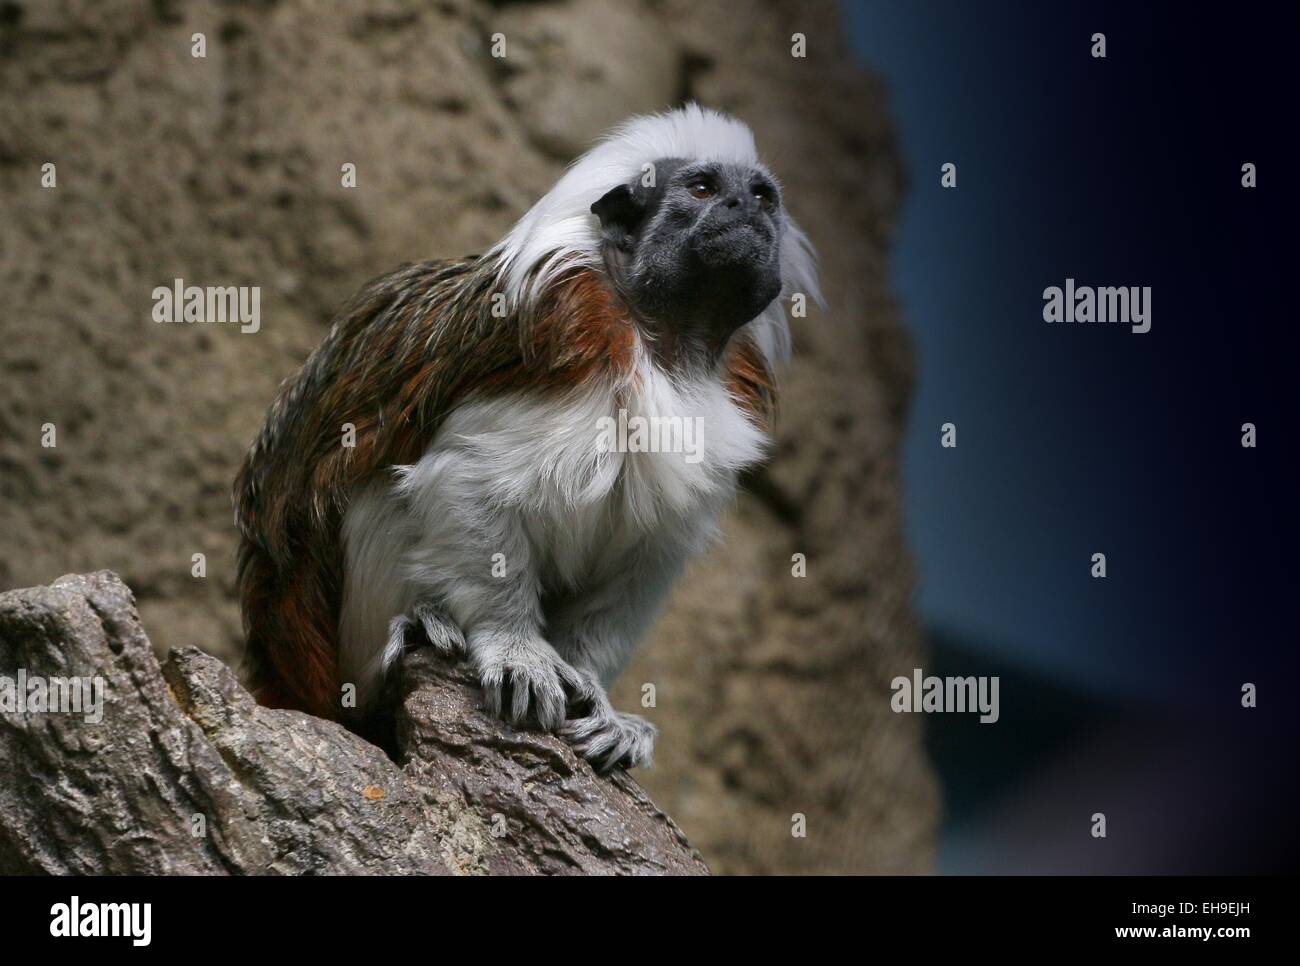 Cotton-top tamarin or Pinché tamarin (Saguinus oedipus), native to North West Colombia Stock Photo